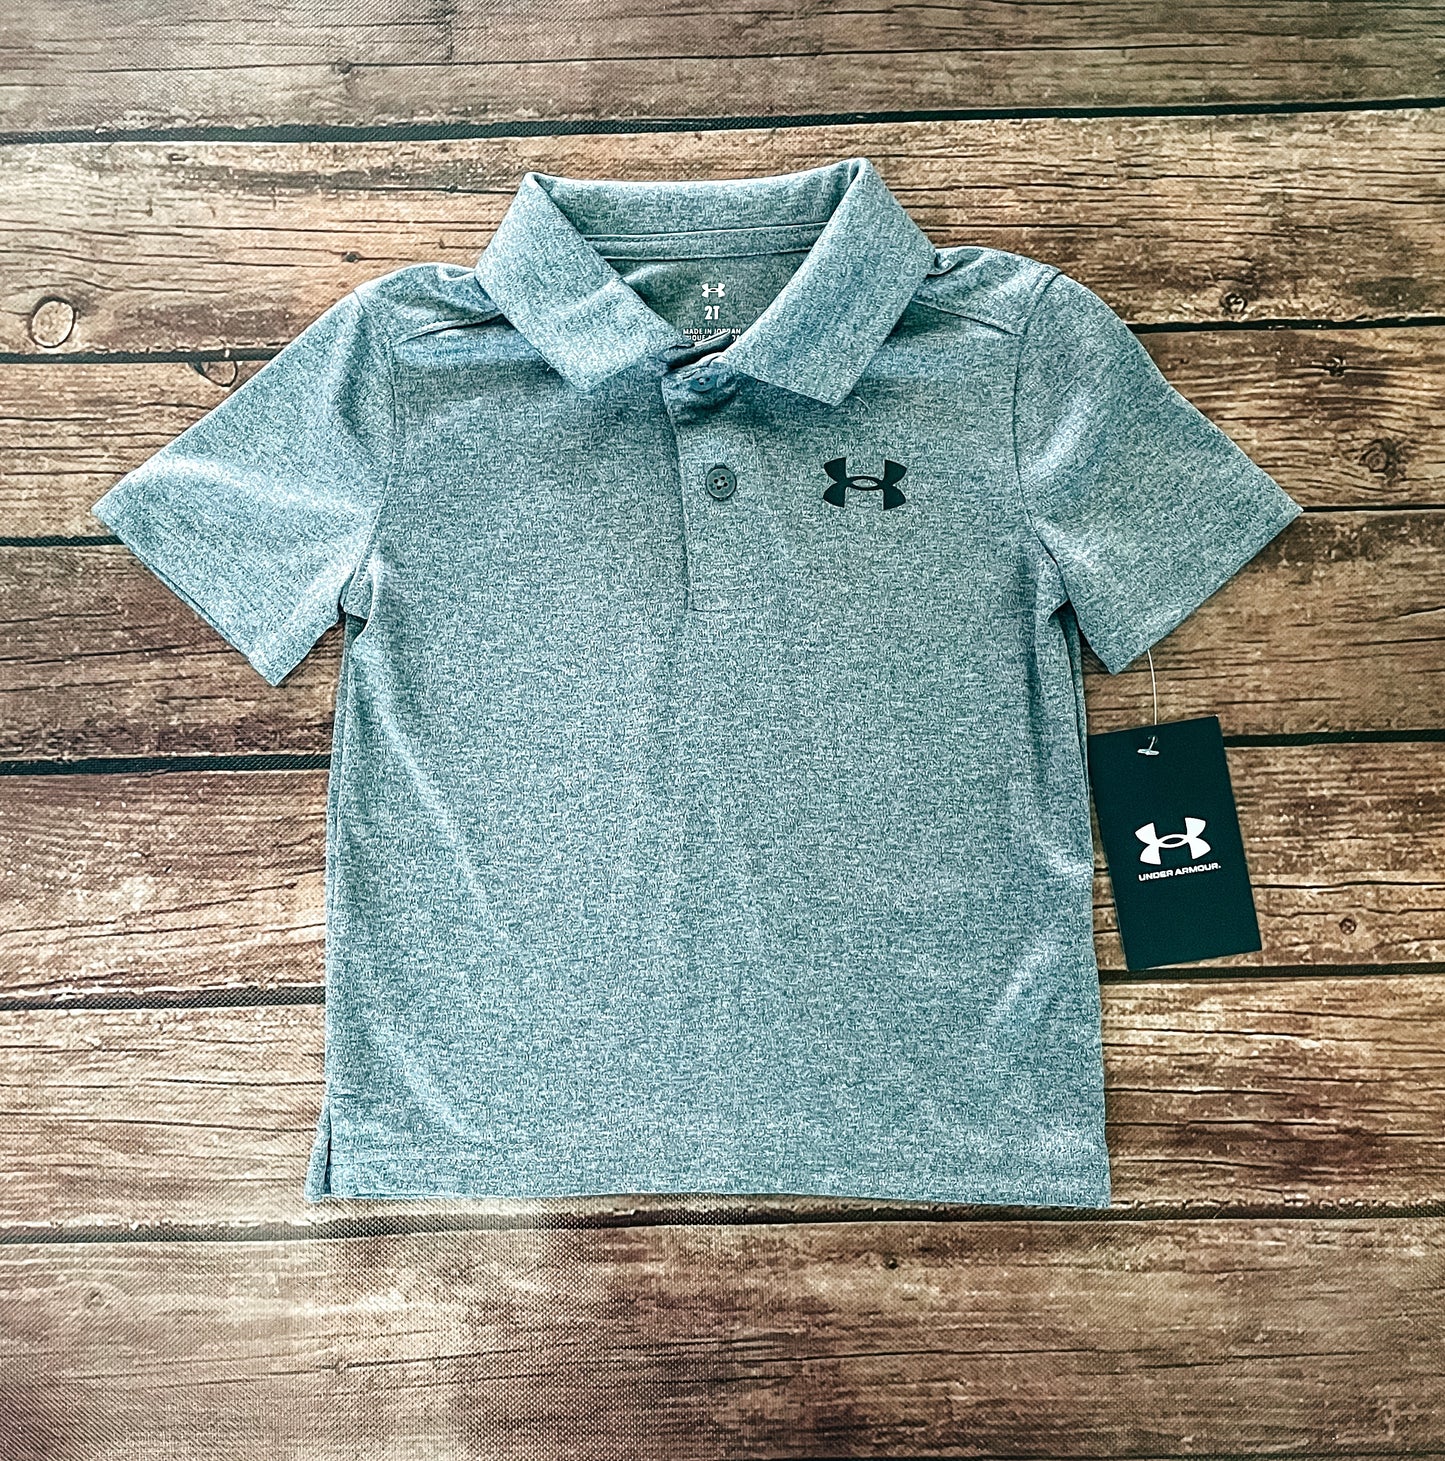 Under Armour Pitch Gray Polo Shirt